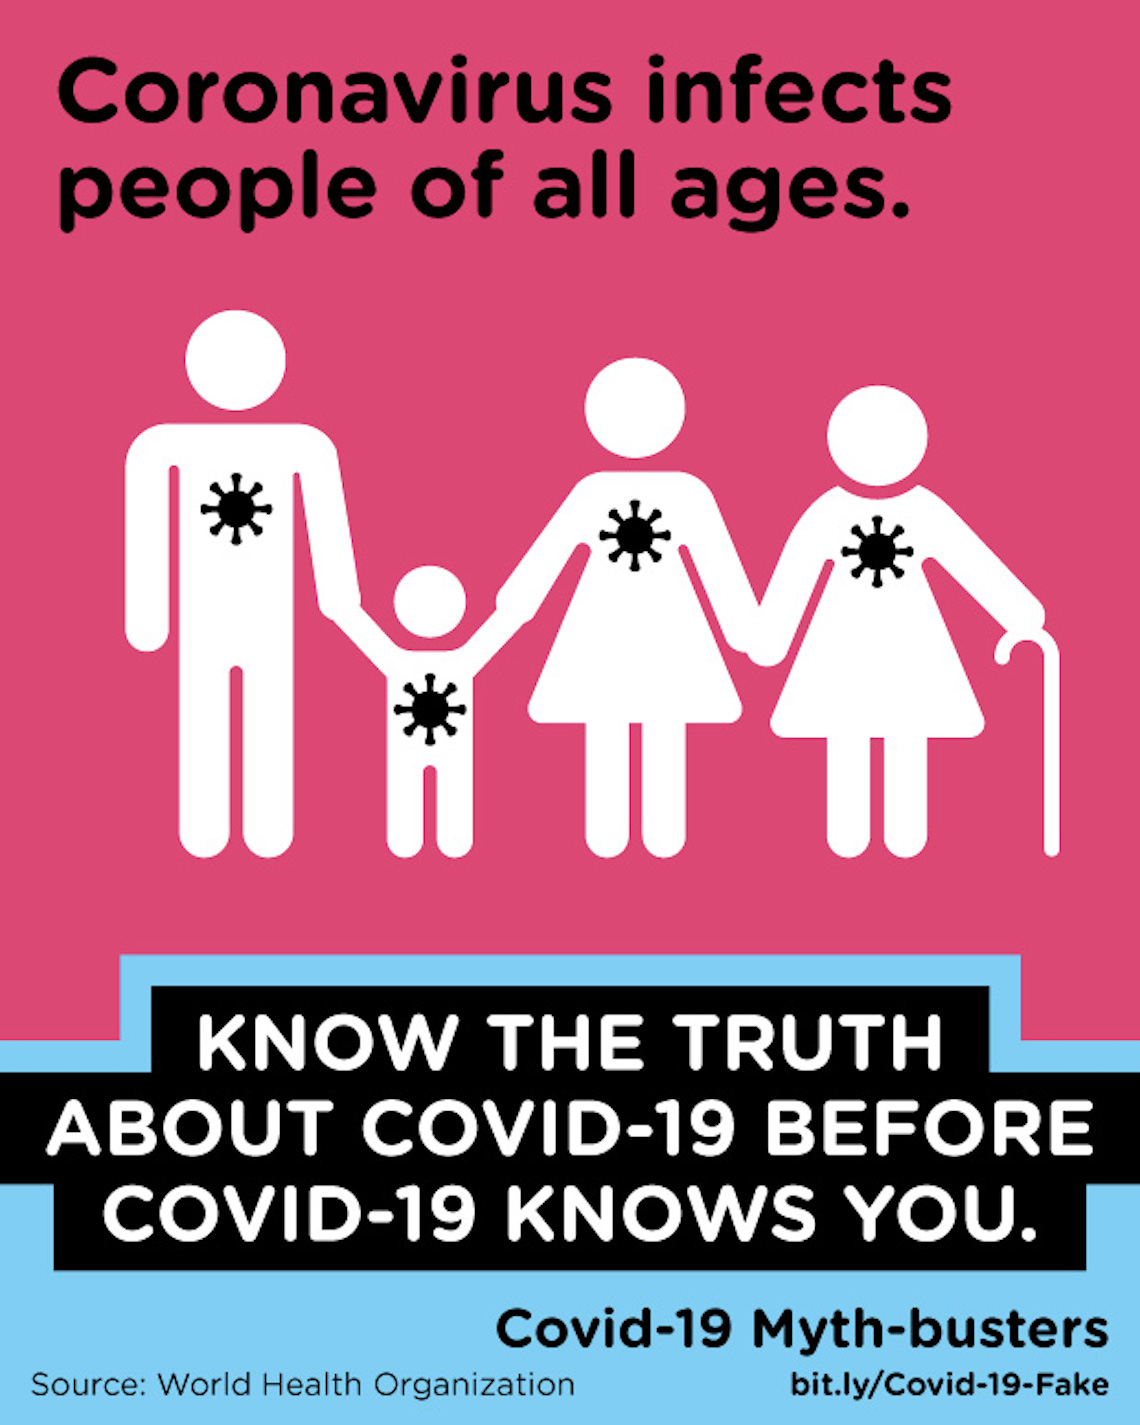 Coronavirus infects people of all ages.